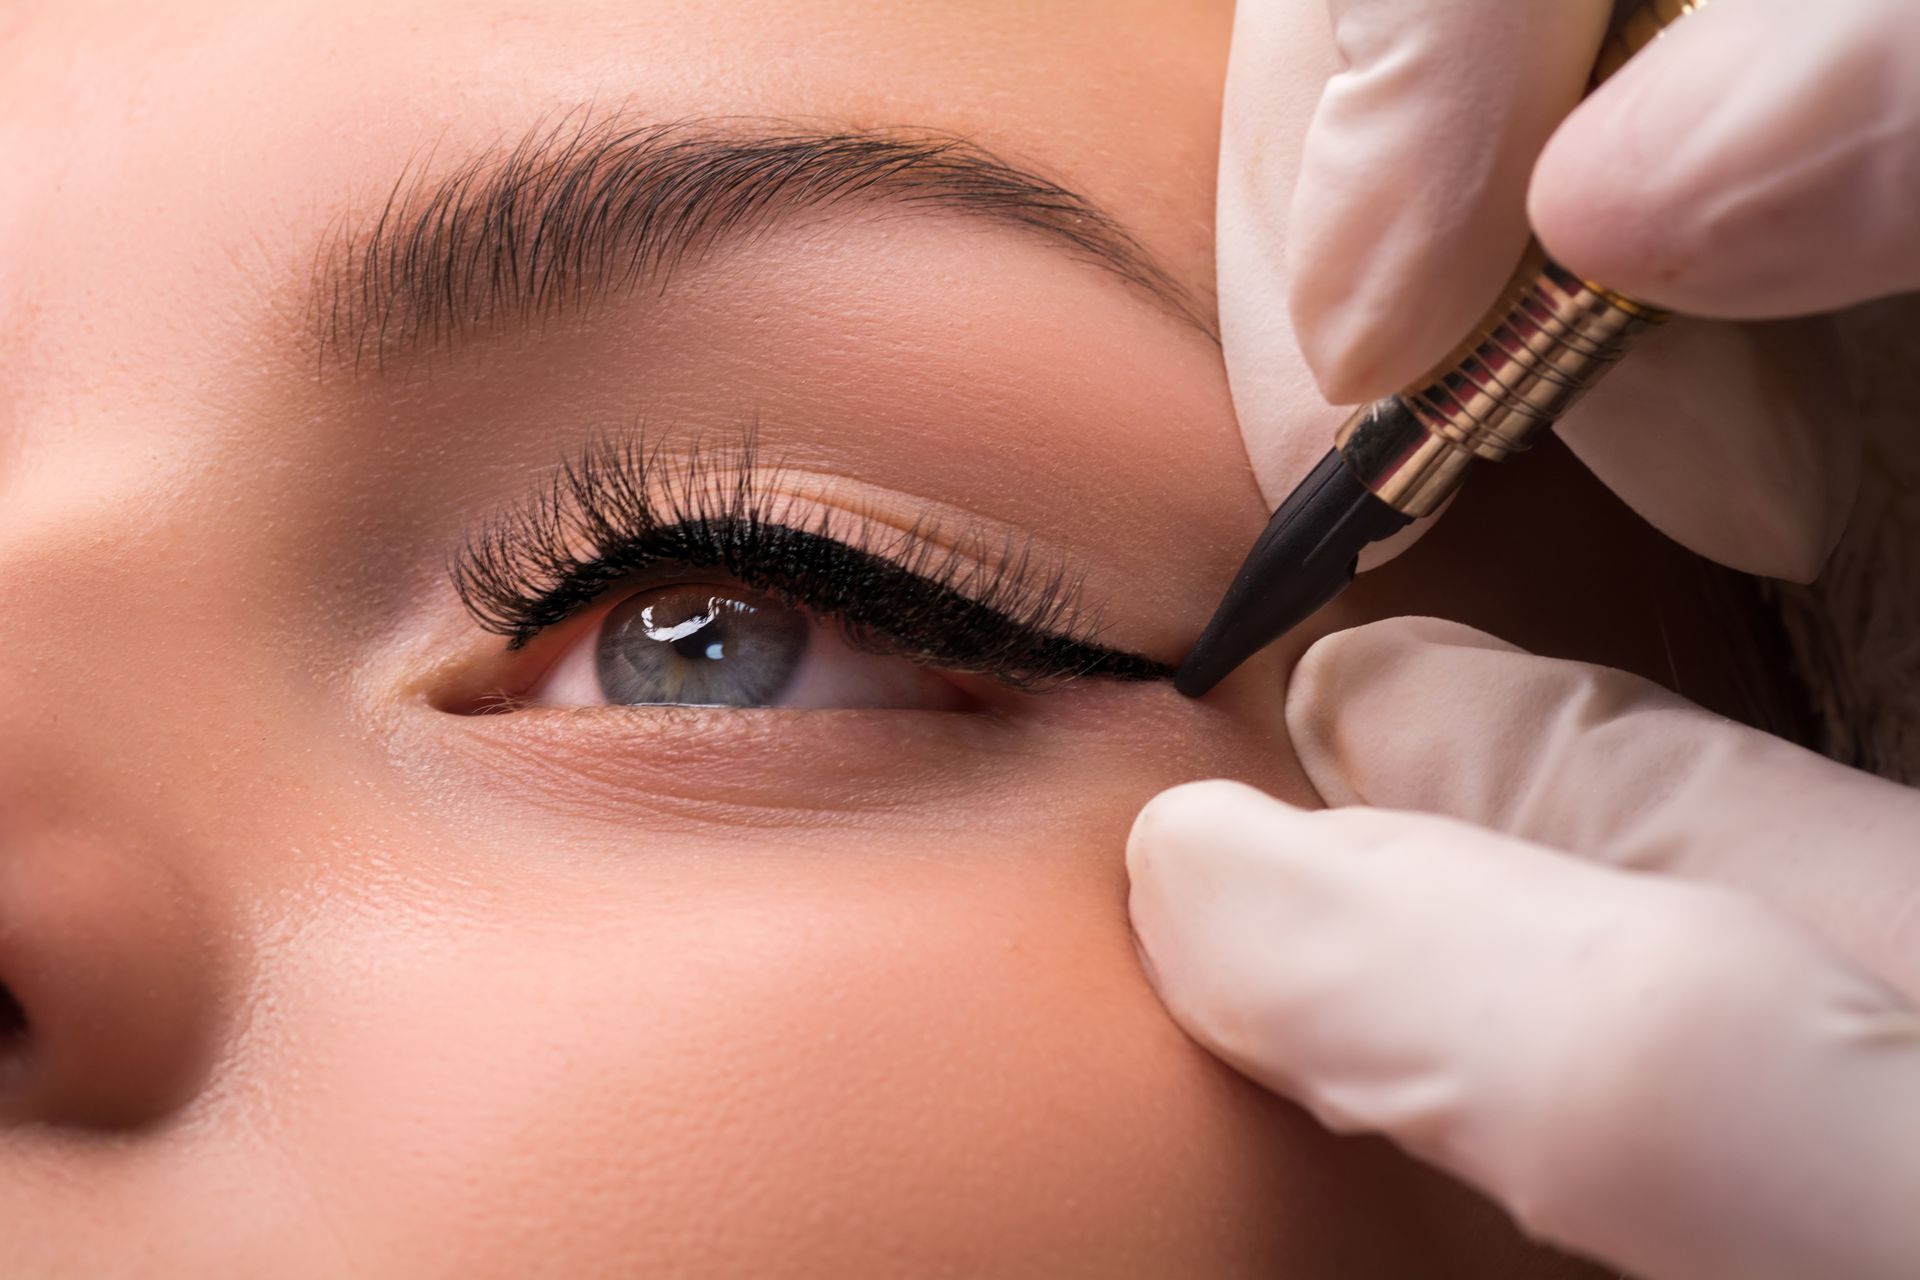 A close up of a person applying eyeliner to a woman 's eye.